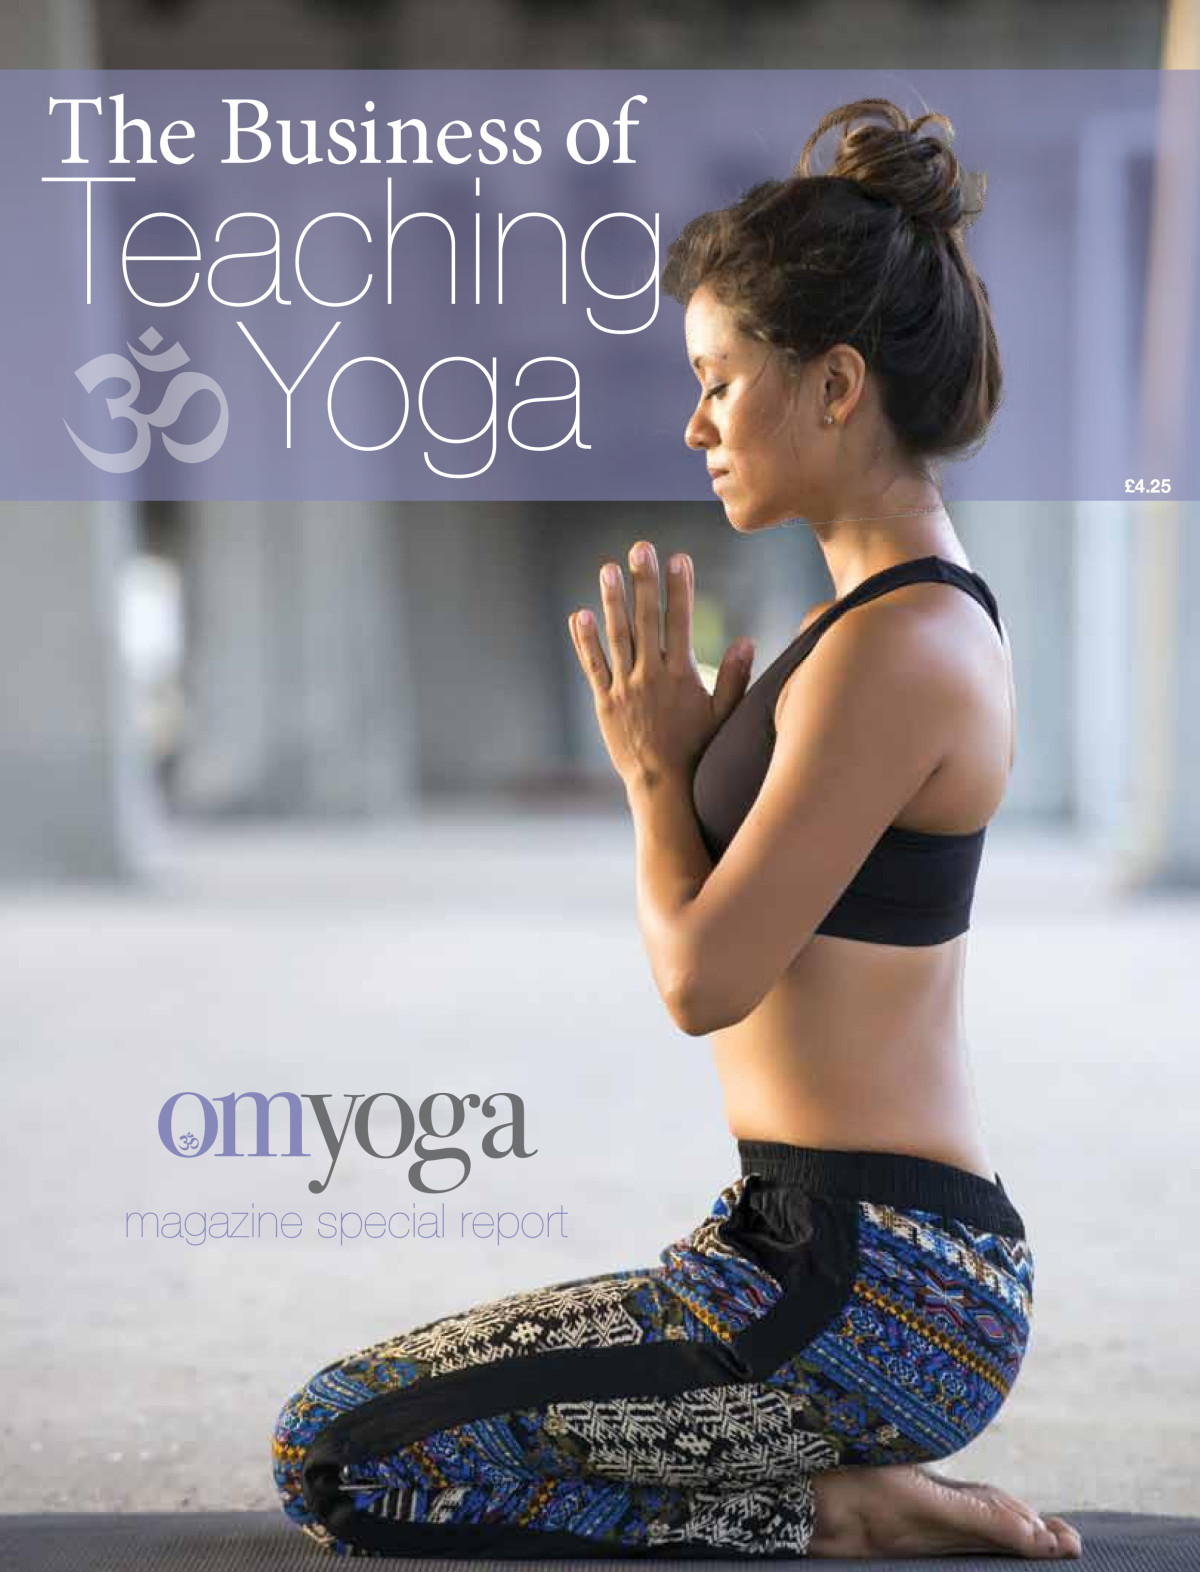 The Business of Teaching Yoga